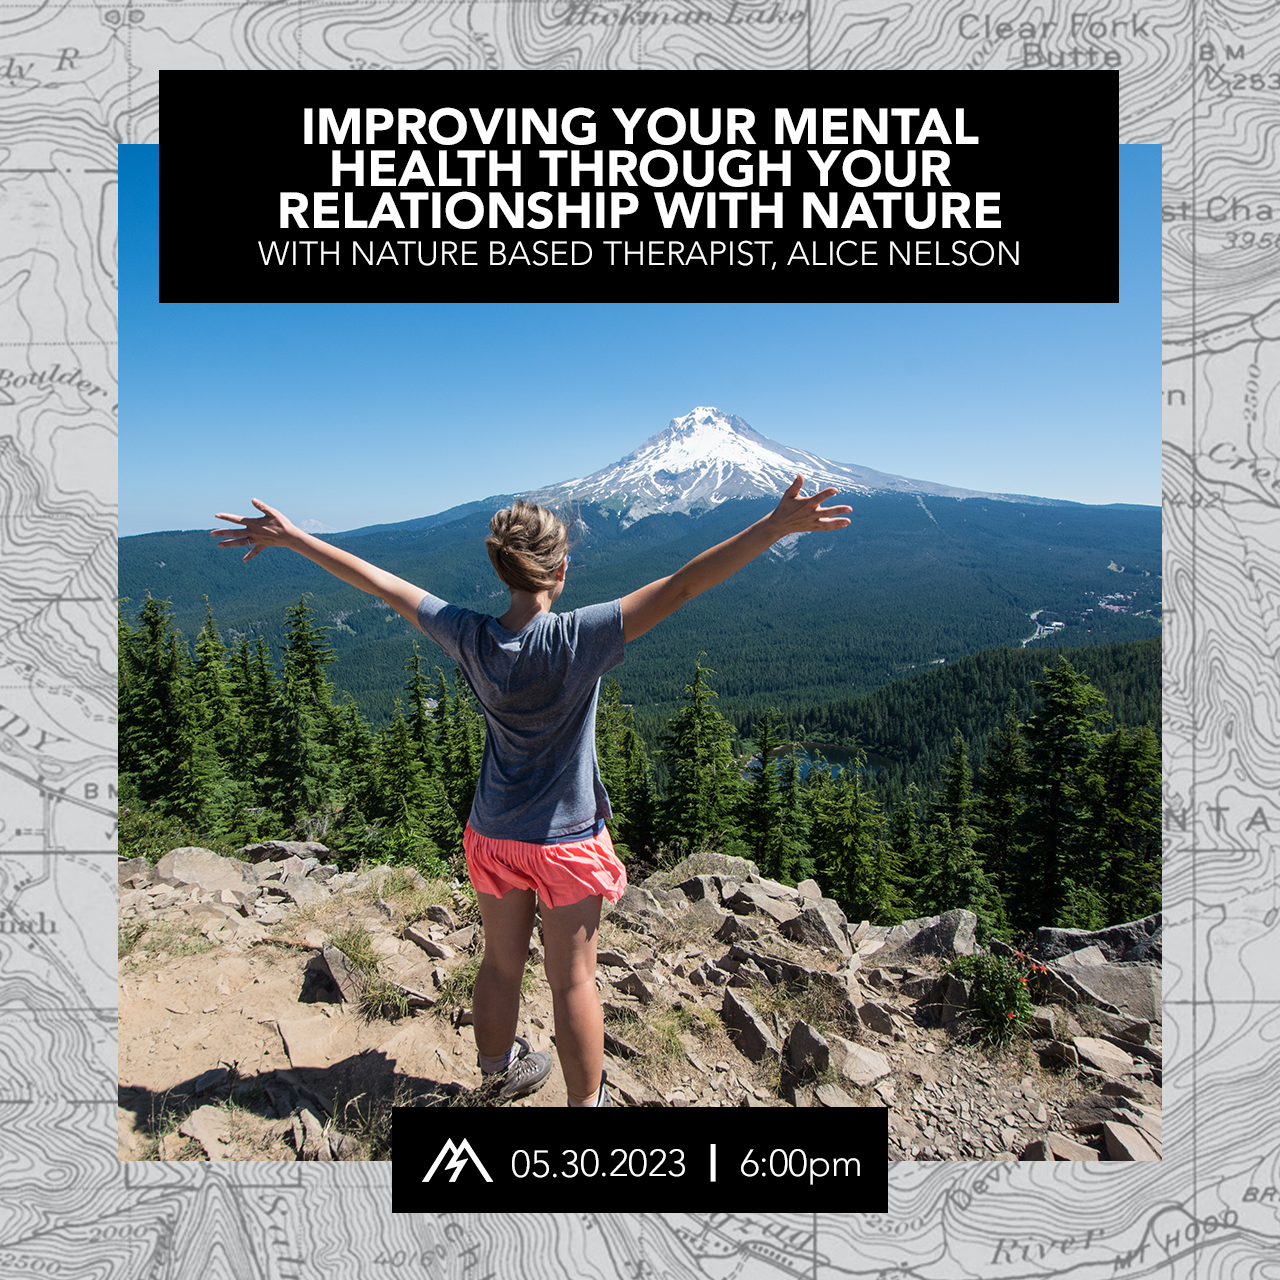 Improving your Mental Health through your Relationship with Nature.